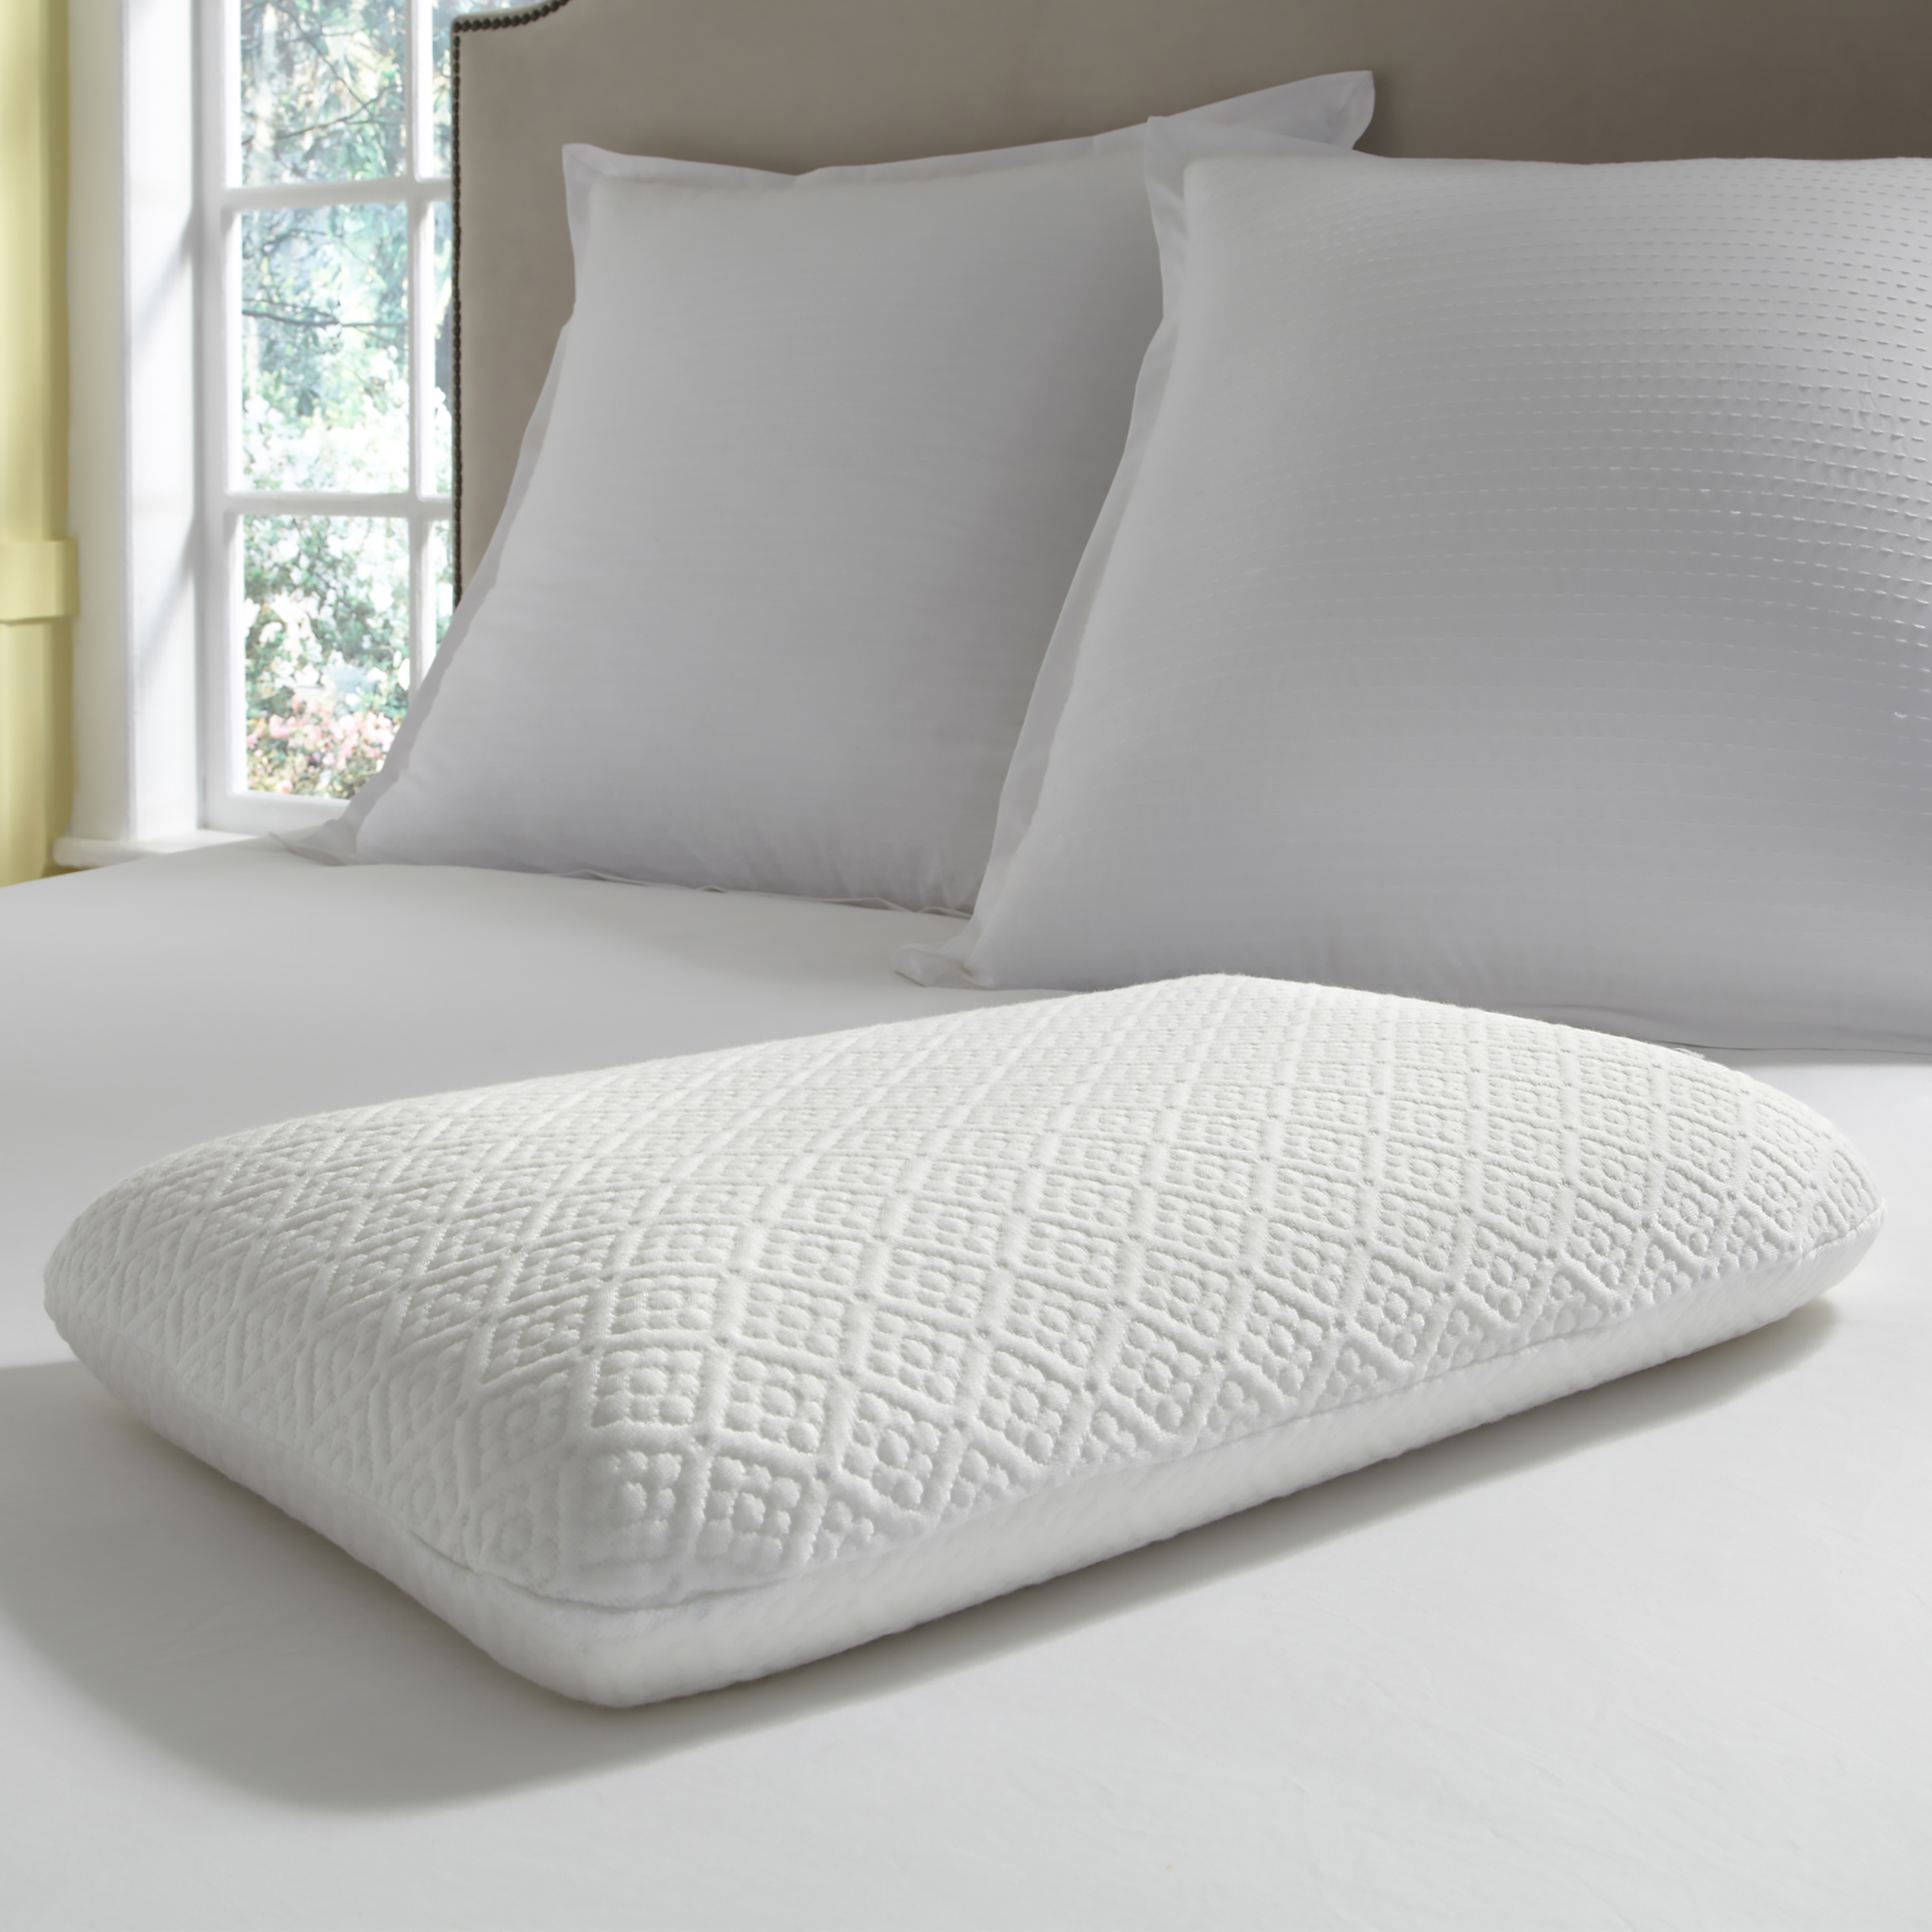 Rio Home Medium Standard Bed Pillow - image 1 of 3